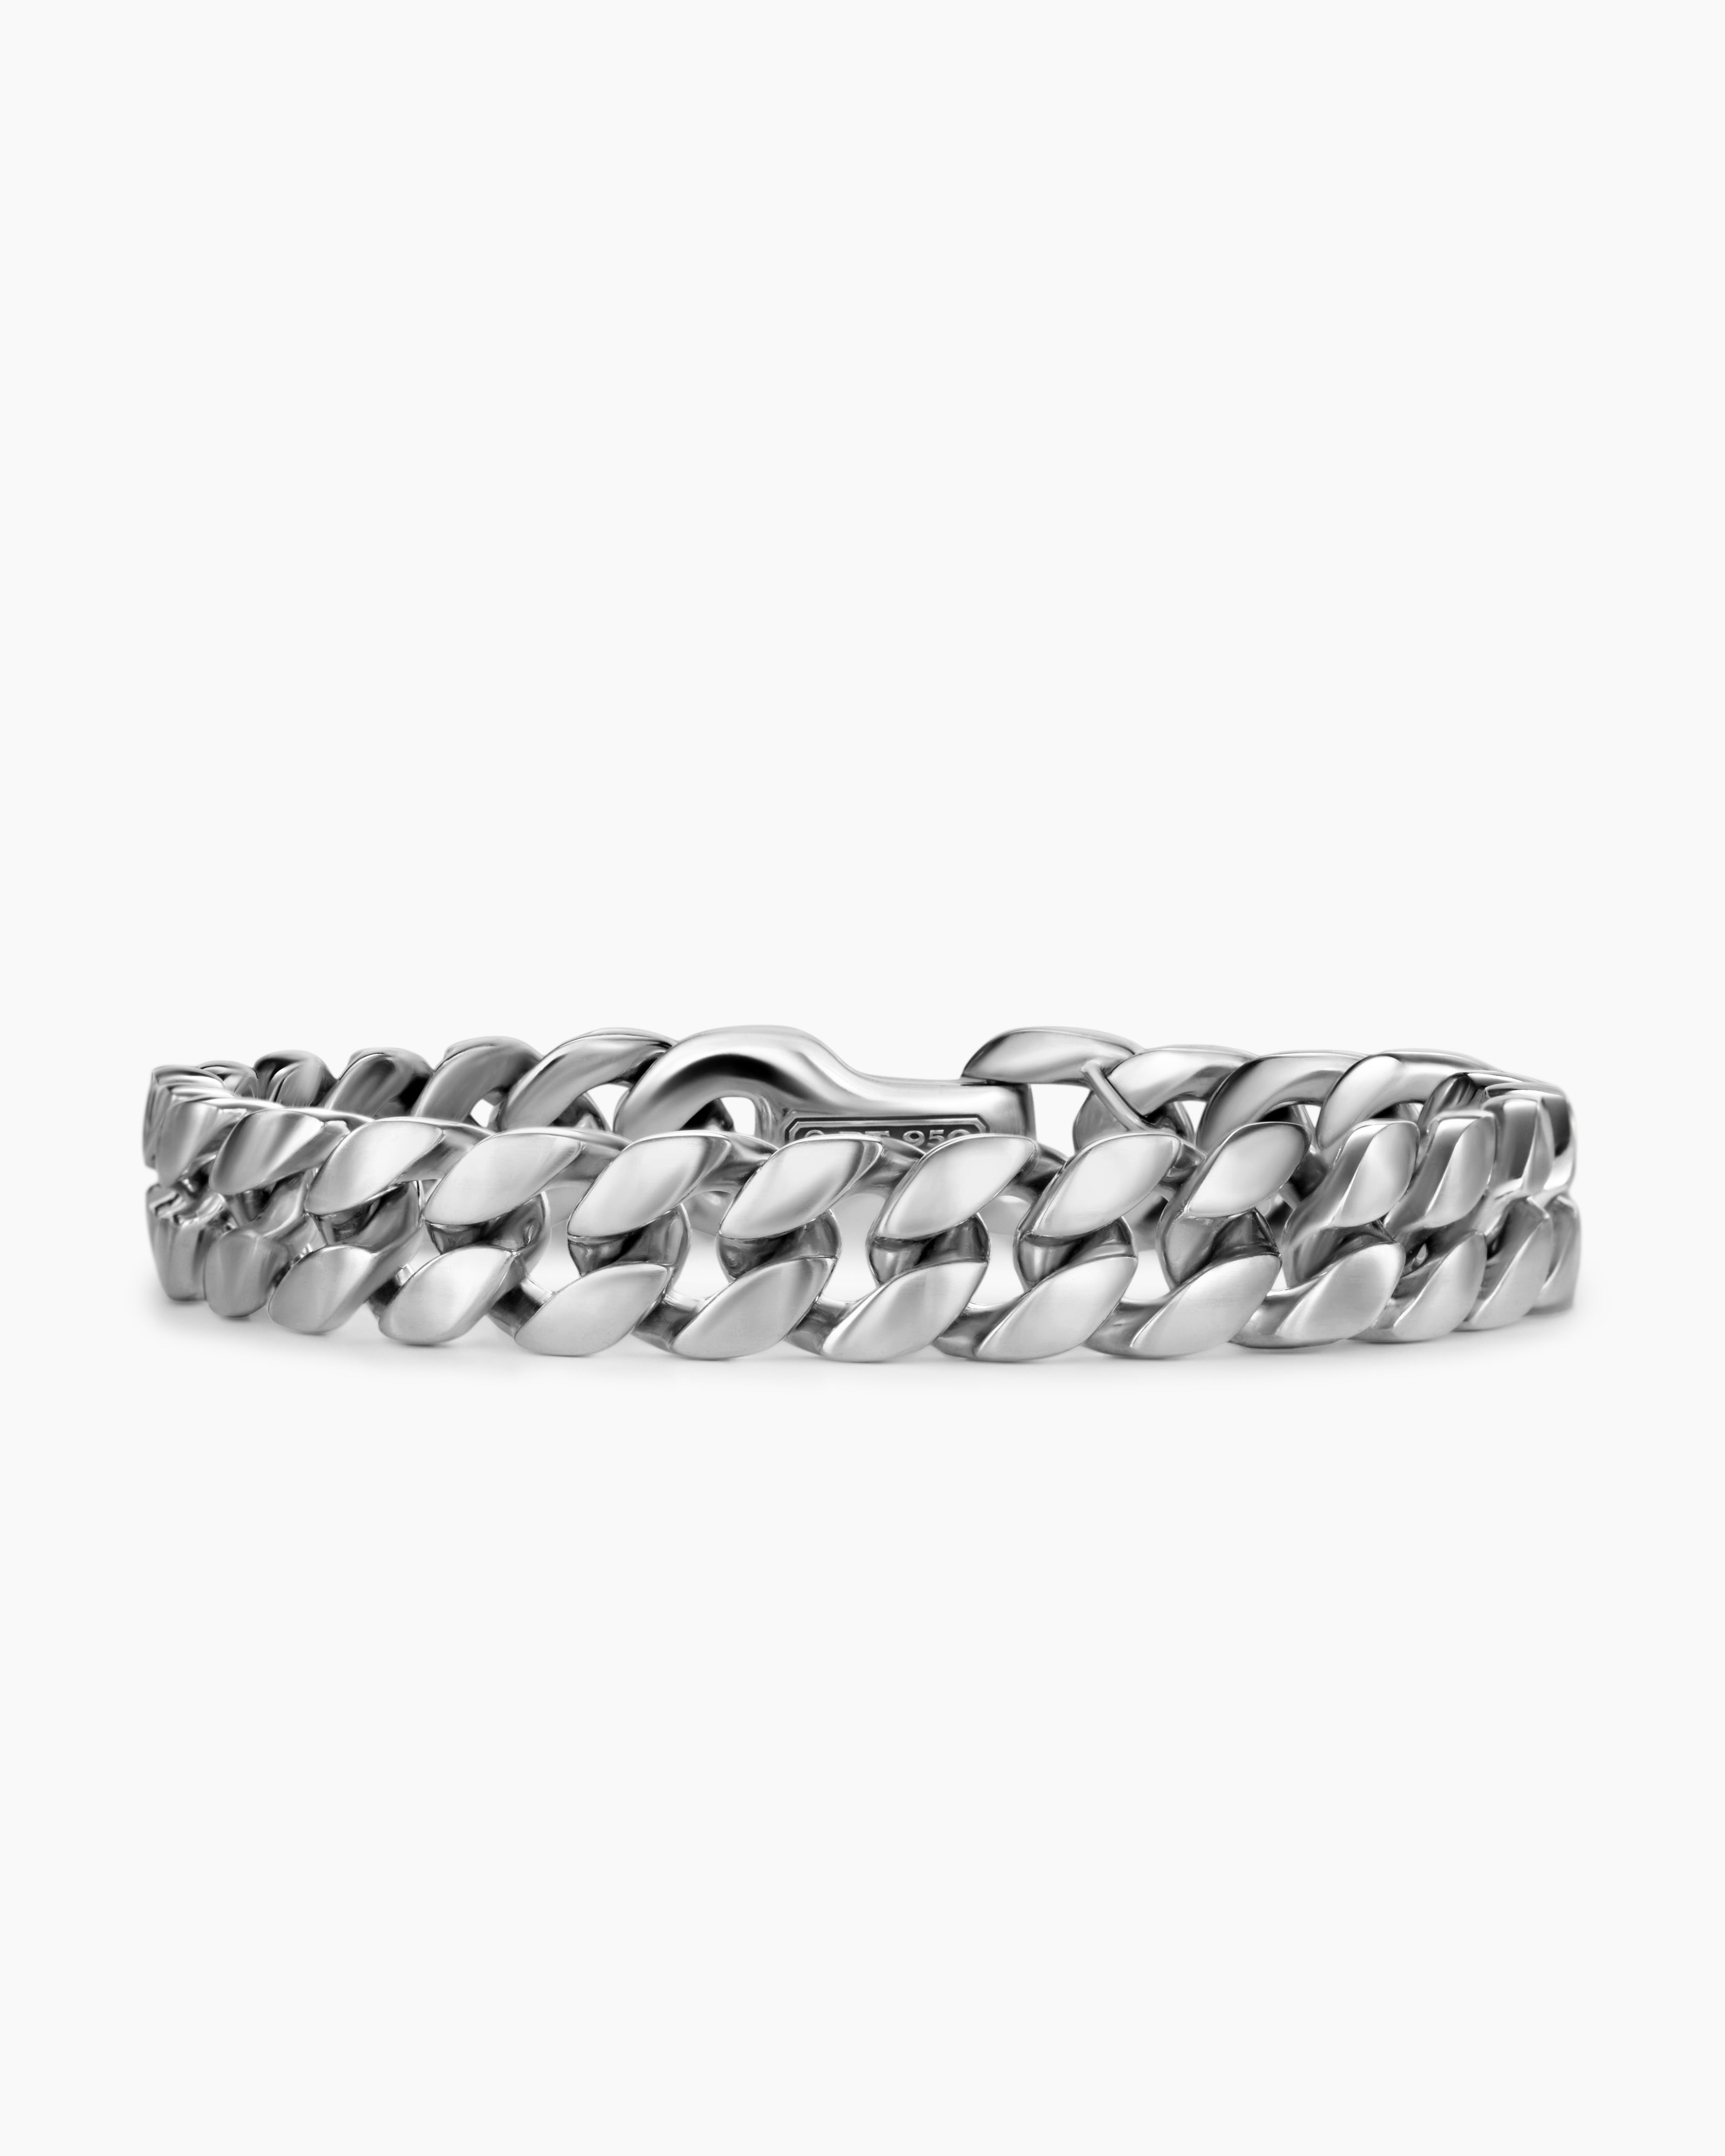 Silver Mens Bracelet | Curb Chain Silver bracelets | man bracelets | mens woman's bracelet | Curb Link Bracelet Mens Woman Jewellery | Gift